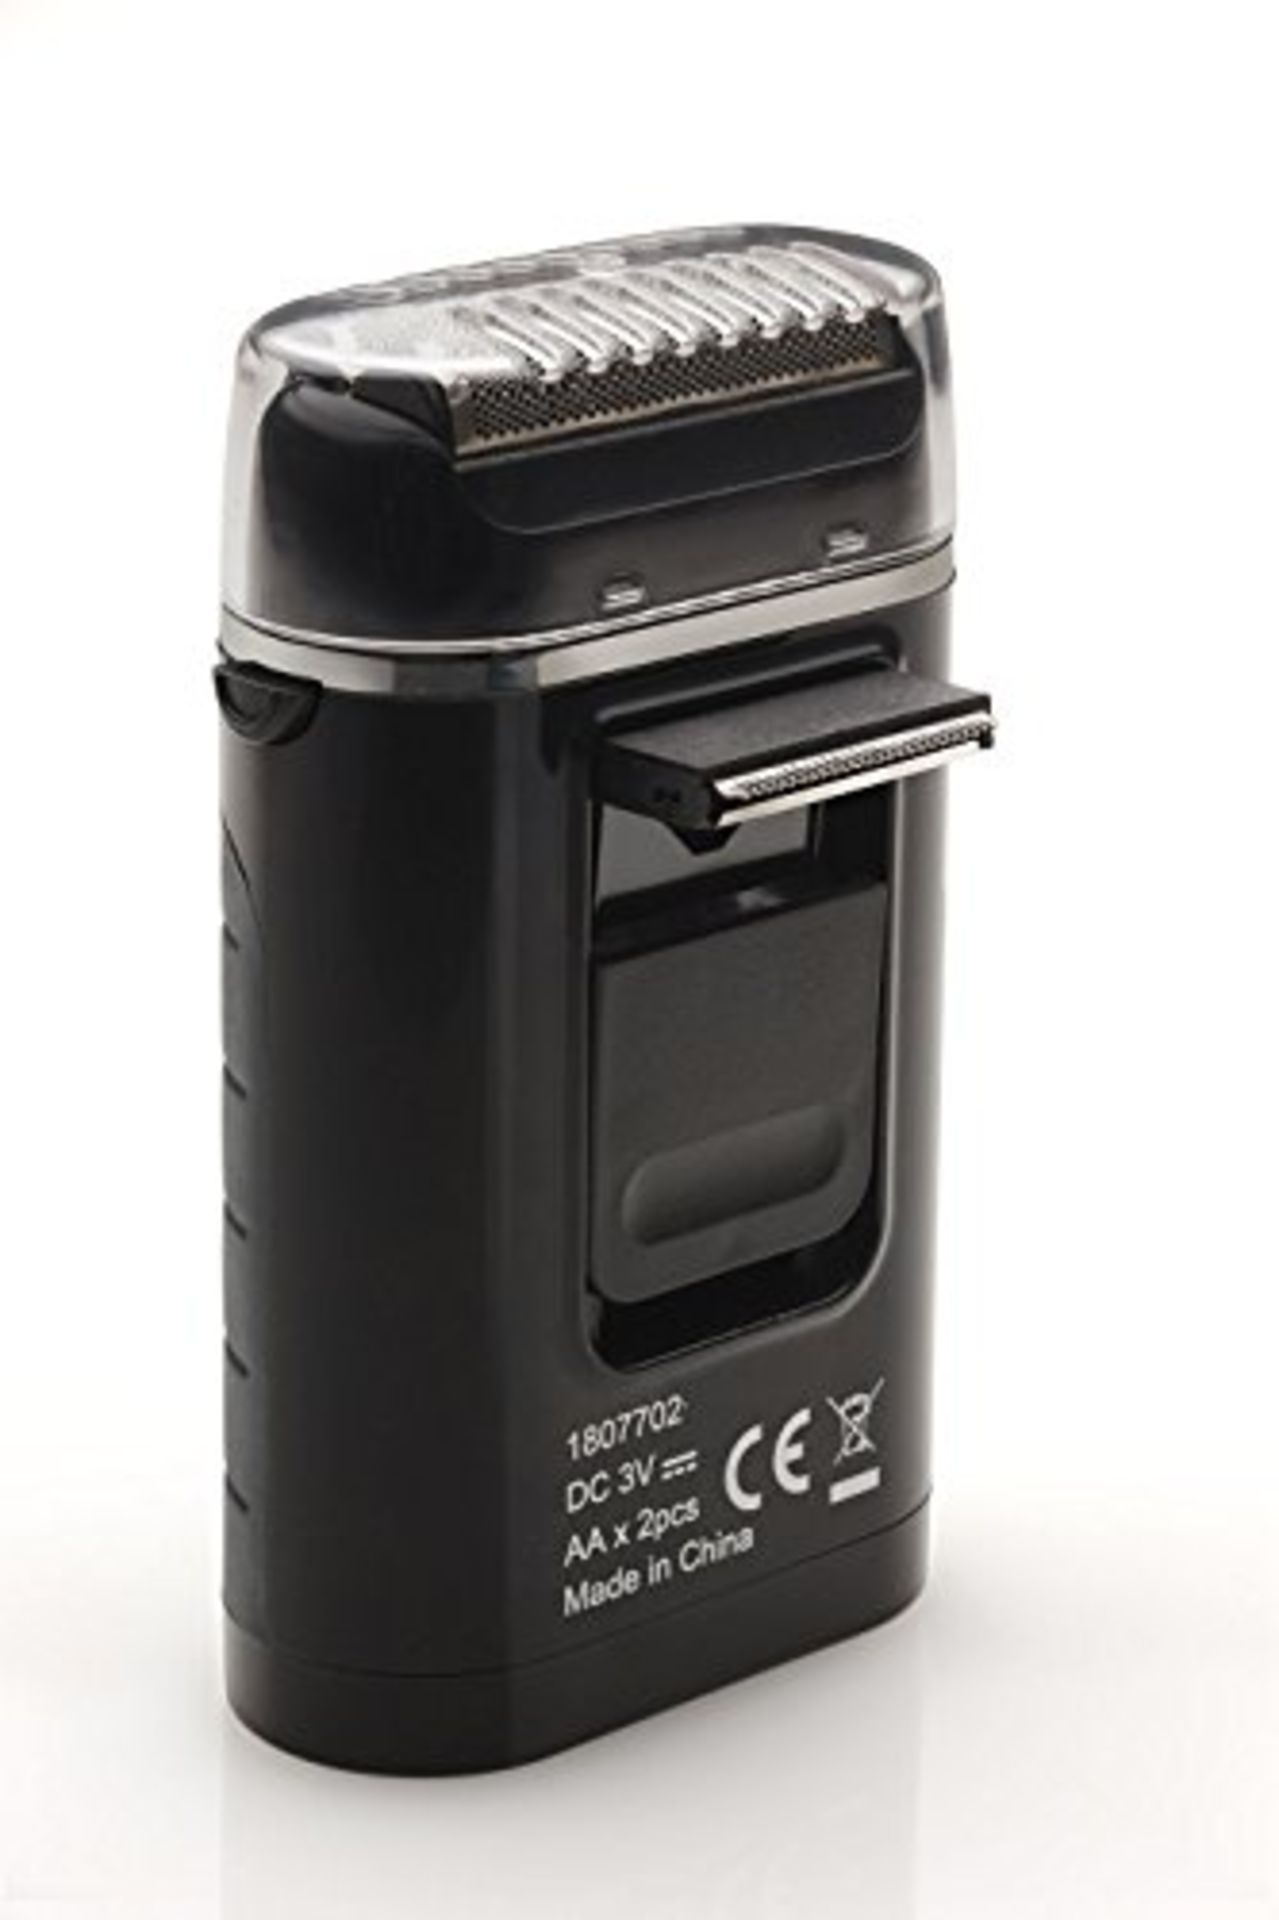 V *TRADE QTY* Brand New Carrera Electric Gents Shaver - Ebay Price £14.95 X 4 YOUR BID PRICE TO BE